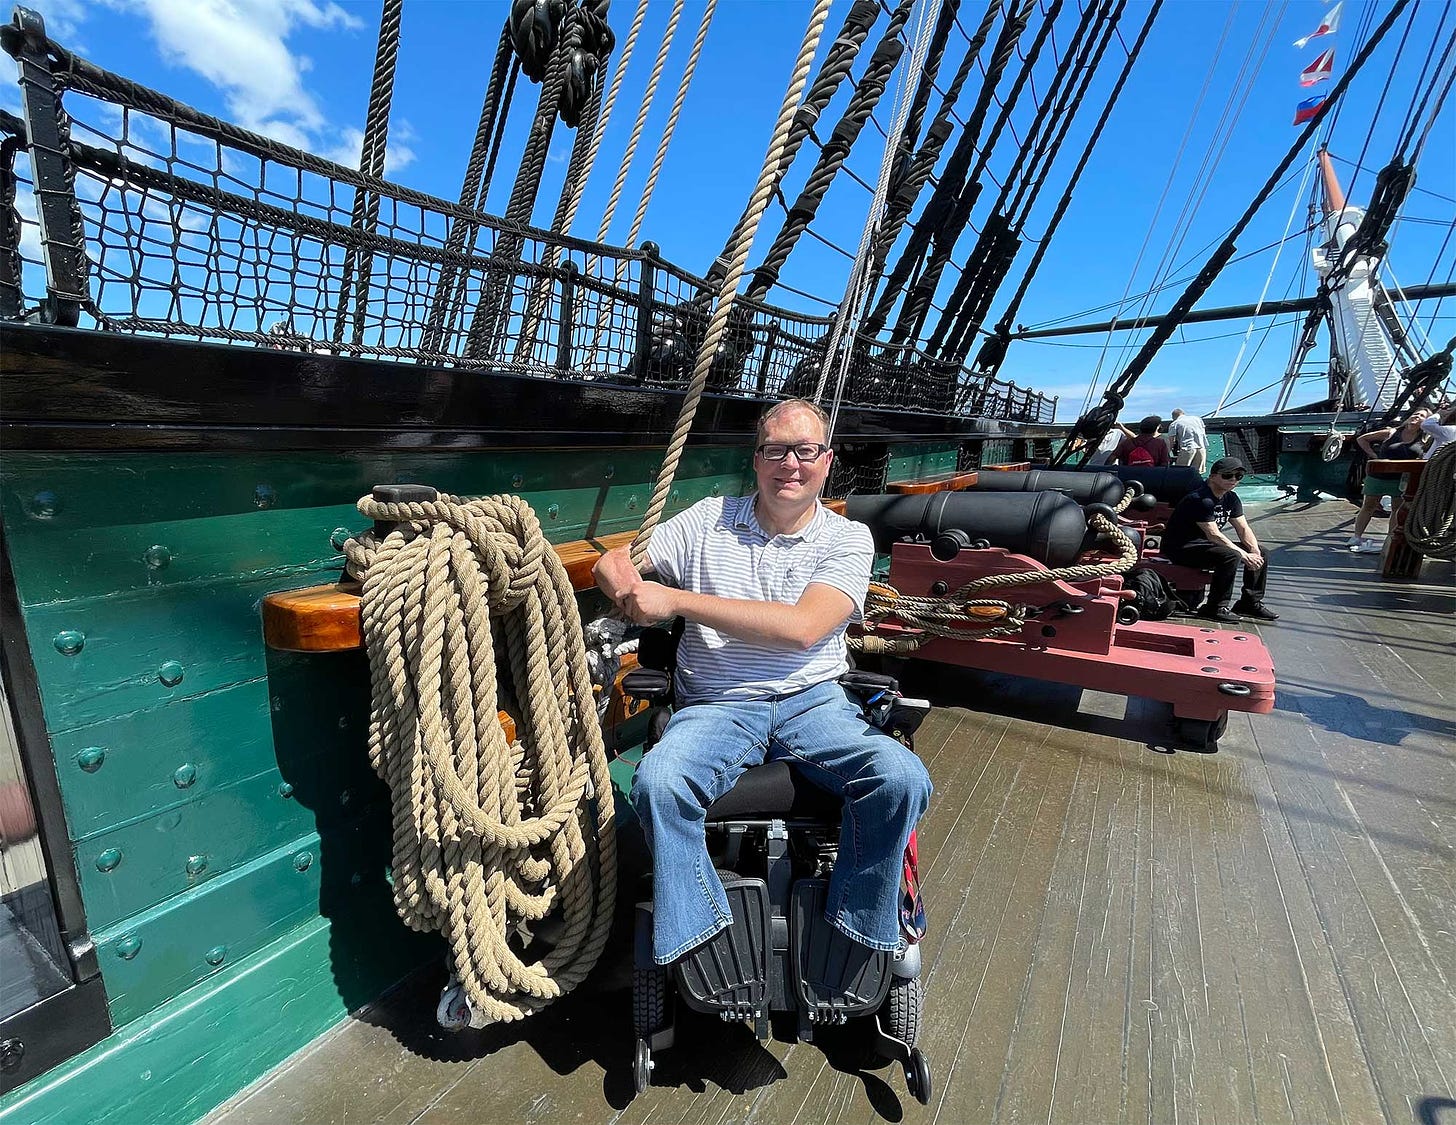 John seated in his wheelchair on the wooden deck of the Constitution with a cannon in the background.